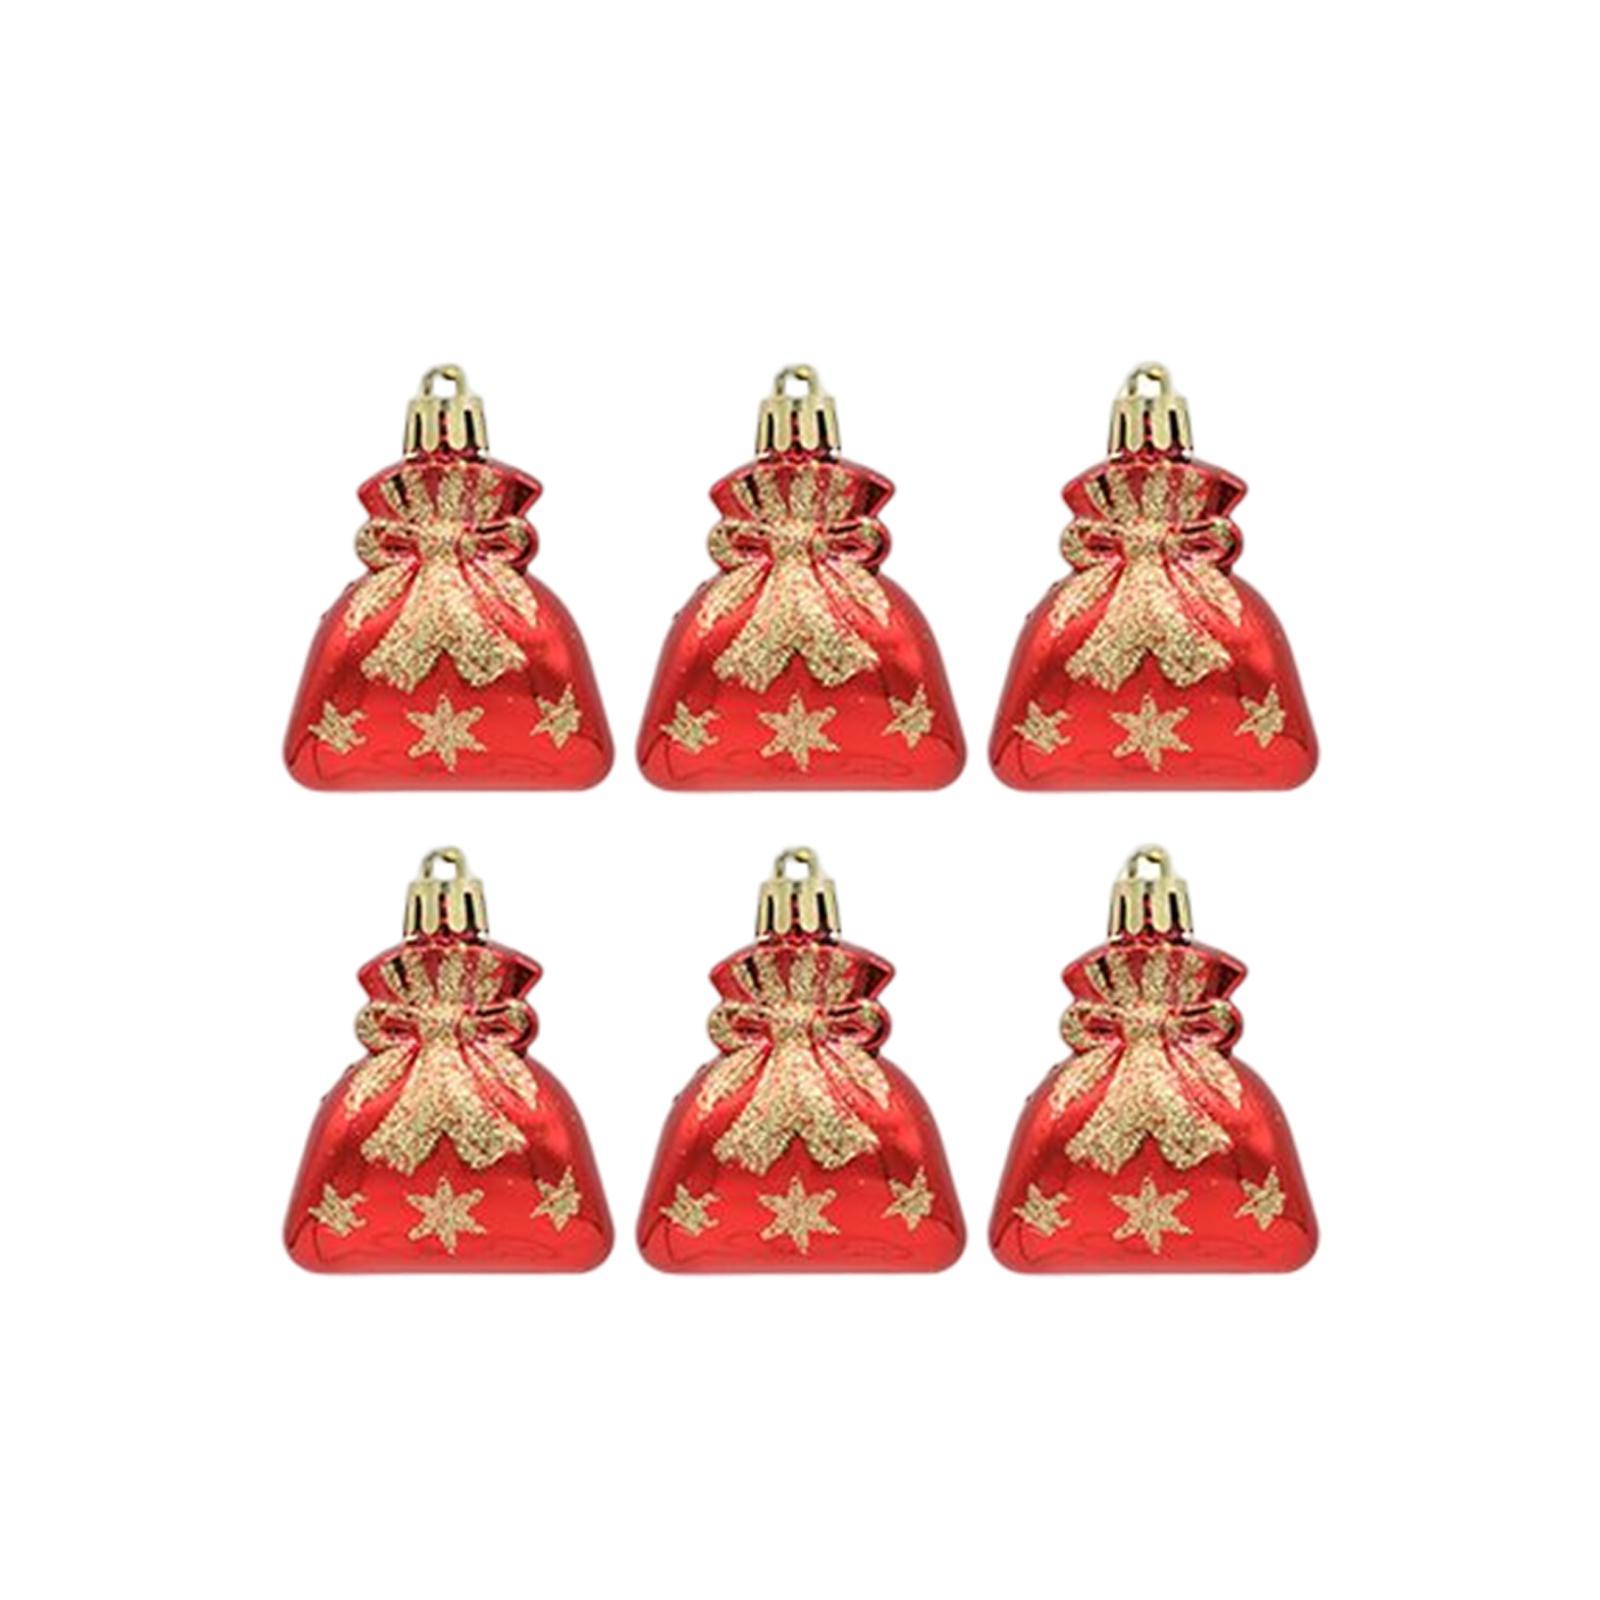 6 Pieces Wrapping Bags Decorative Drawstring Bags for Christmas